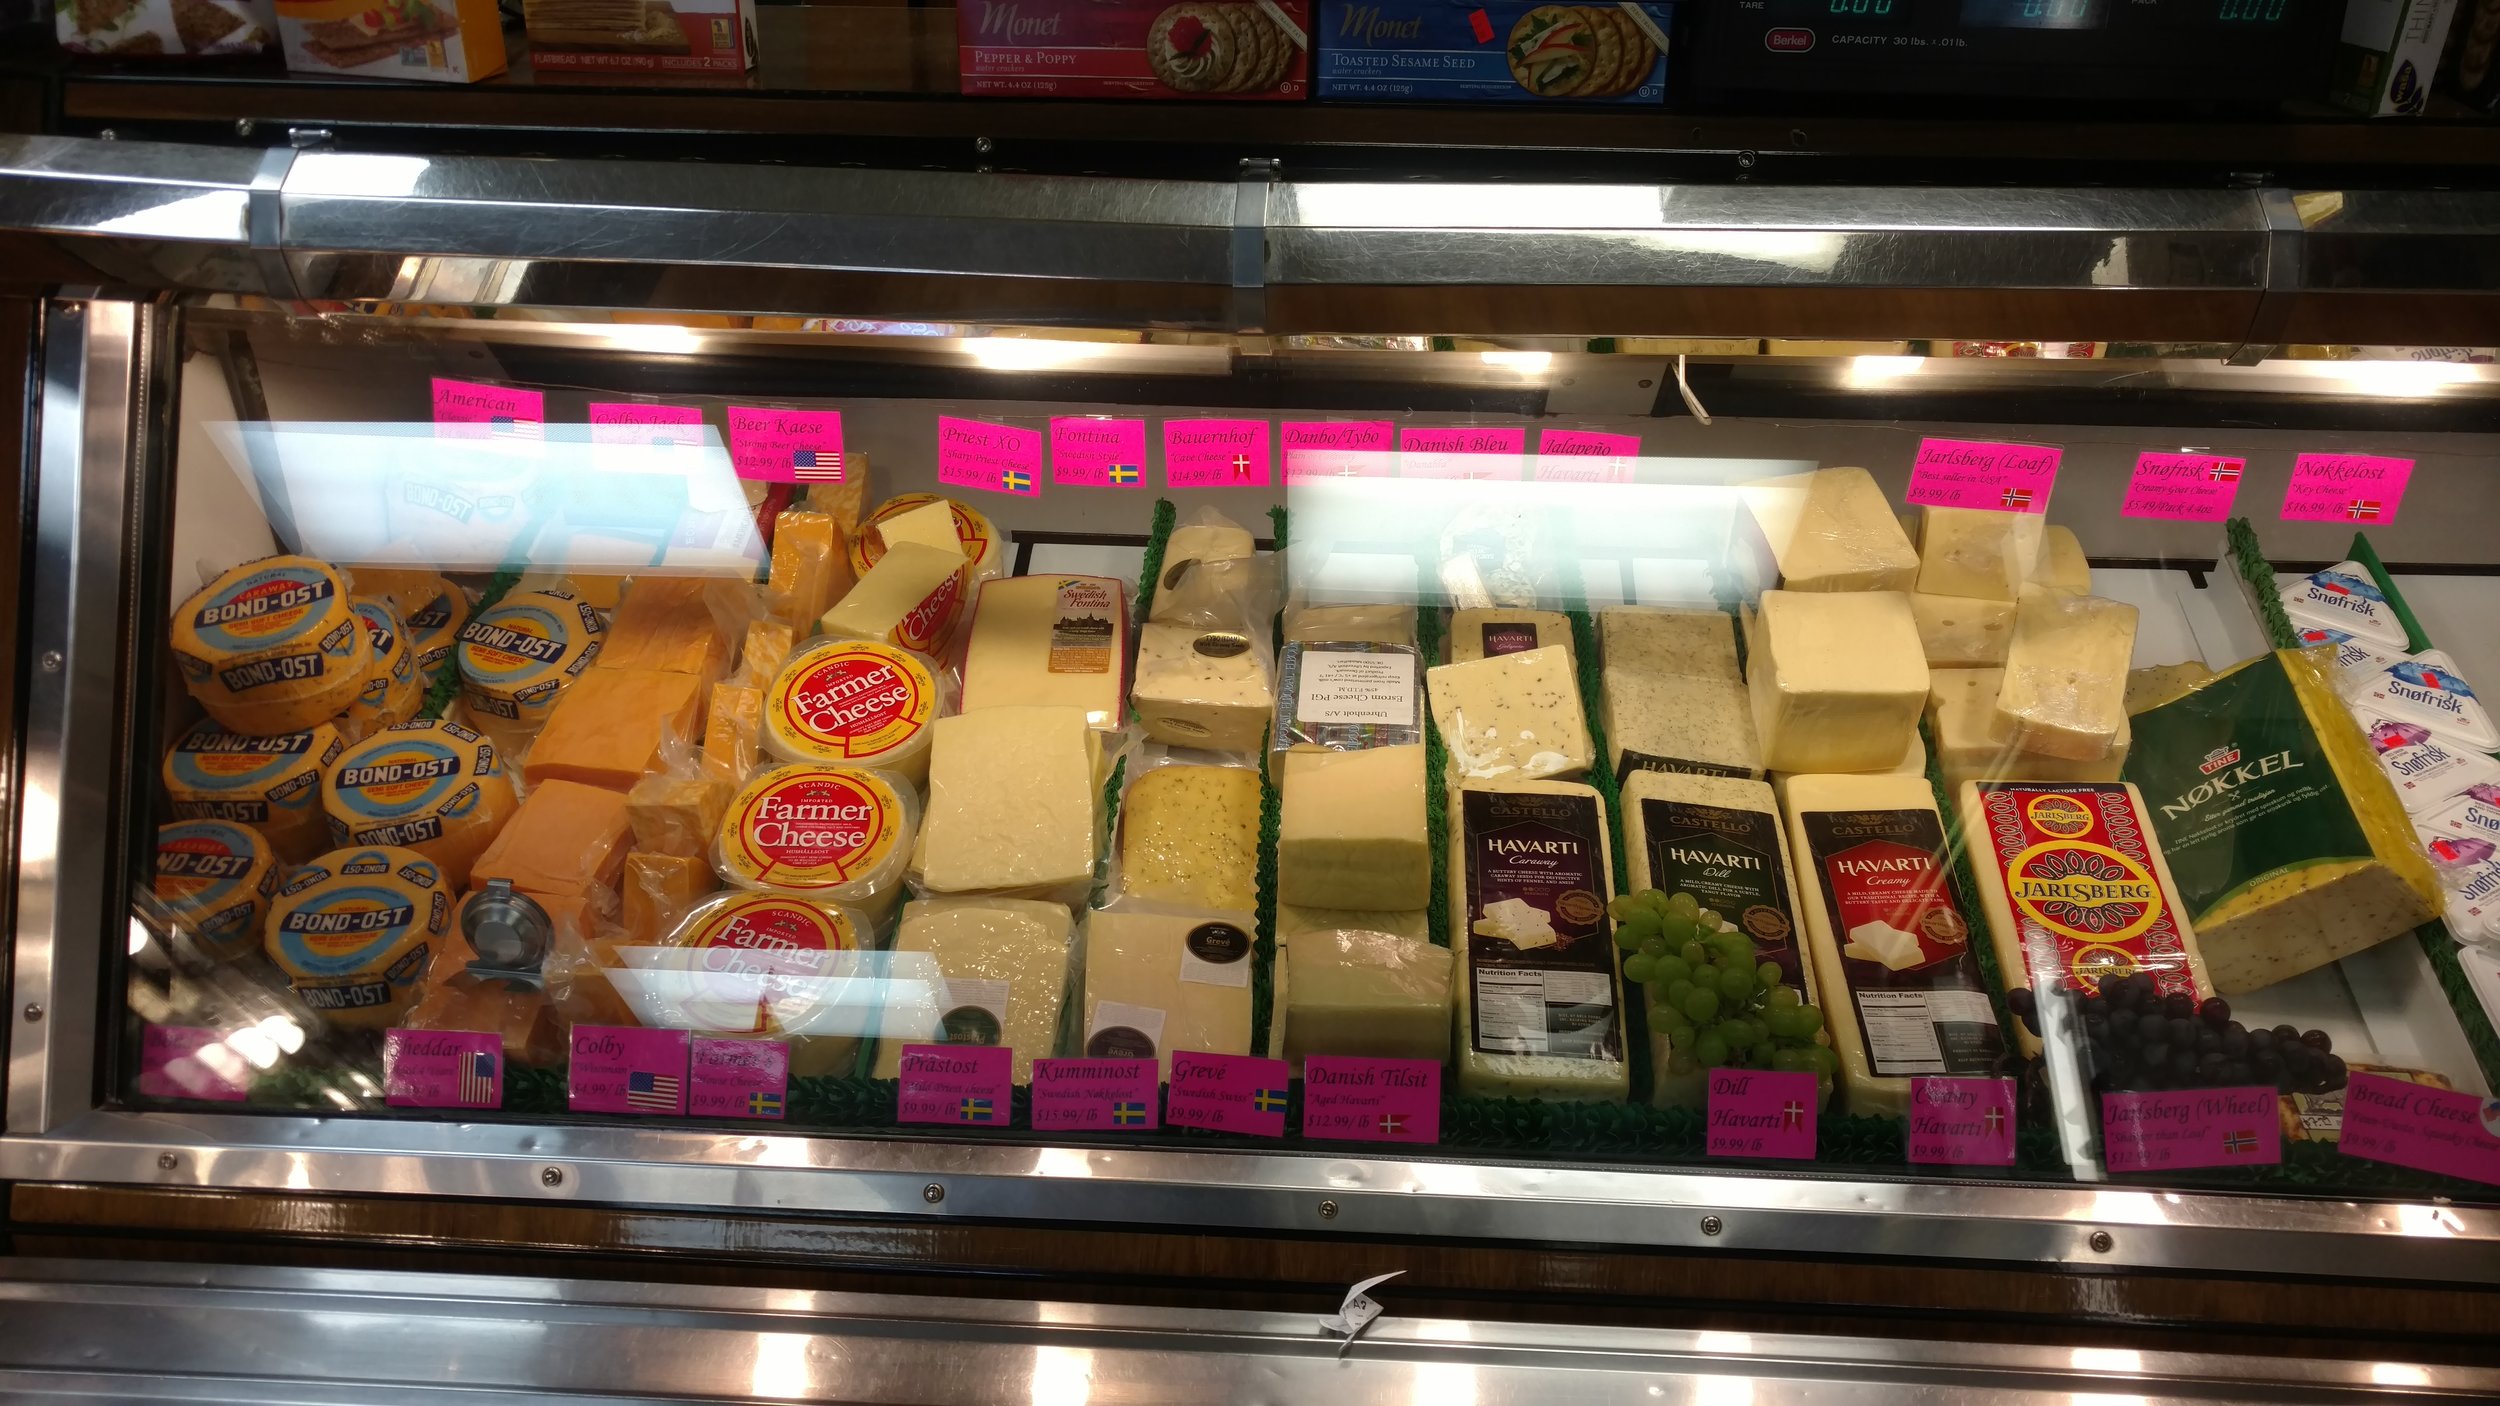 The cheese section